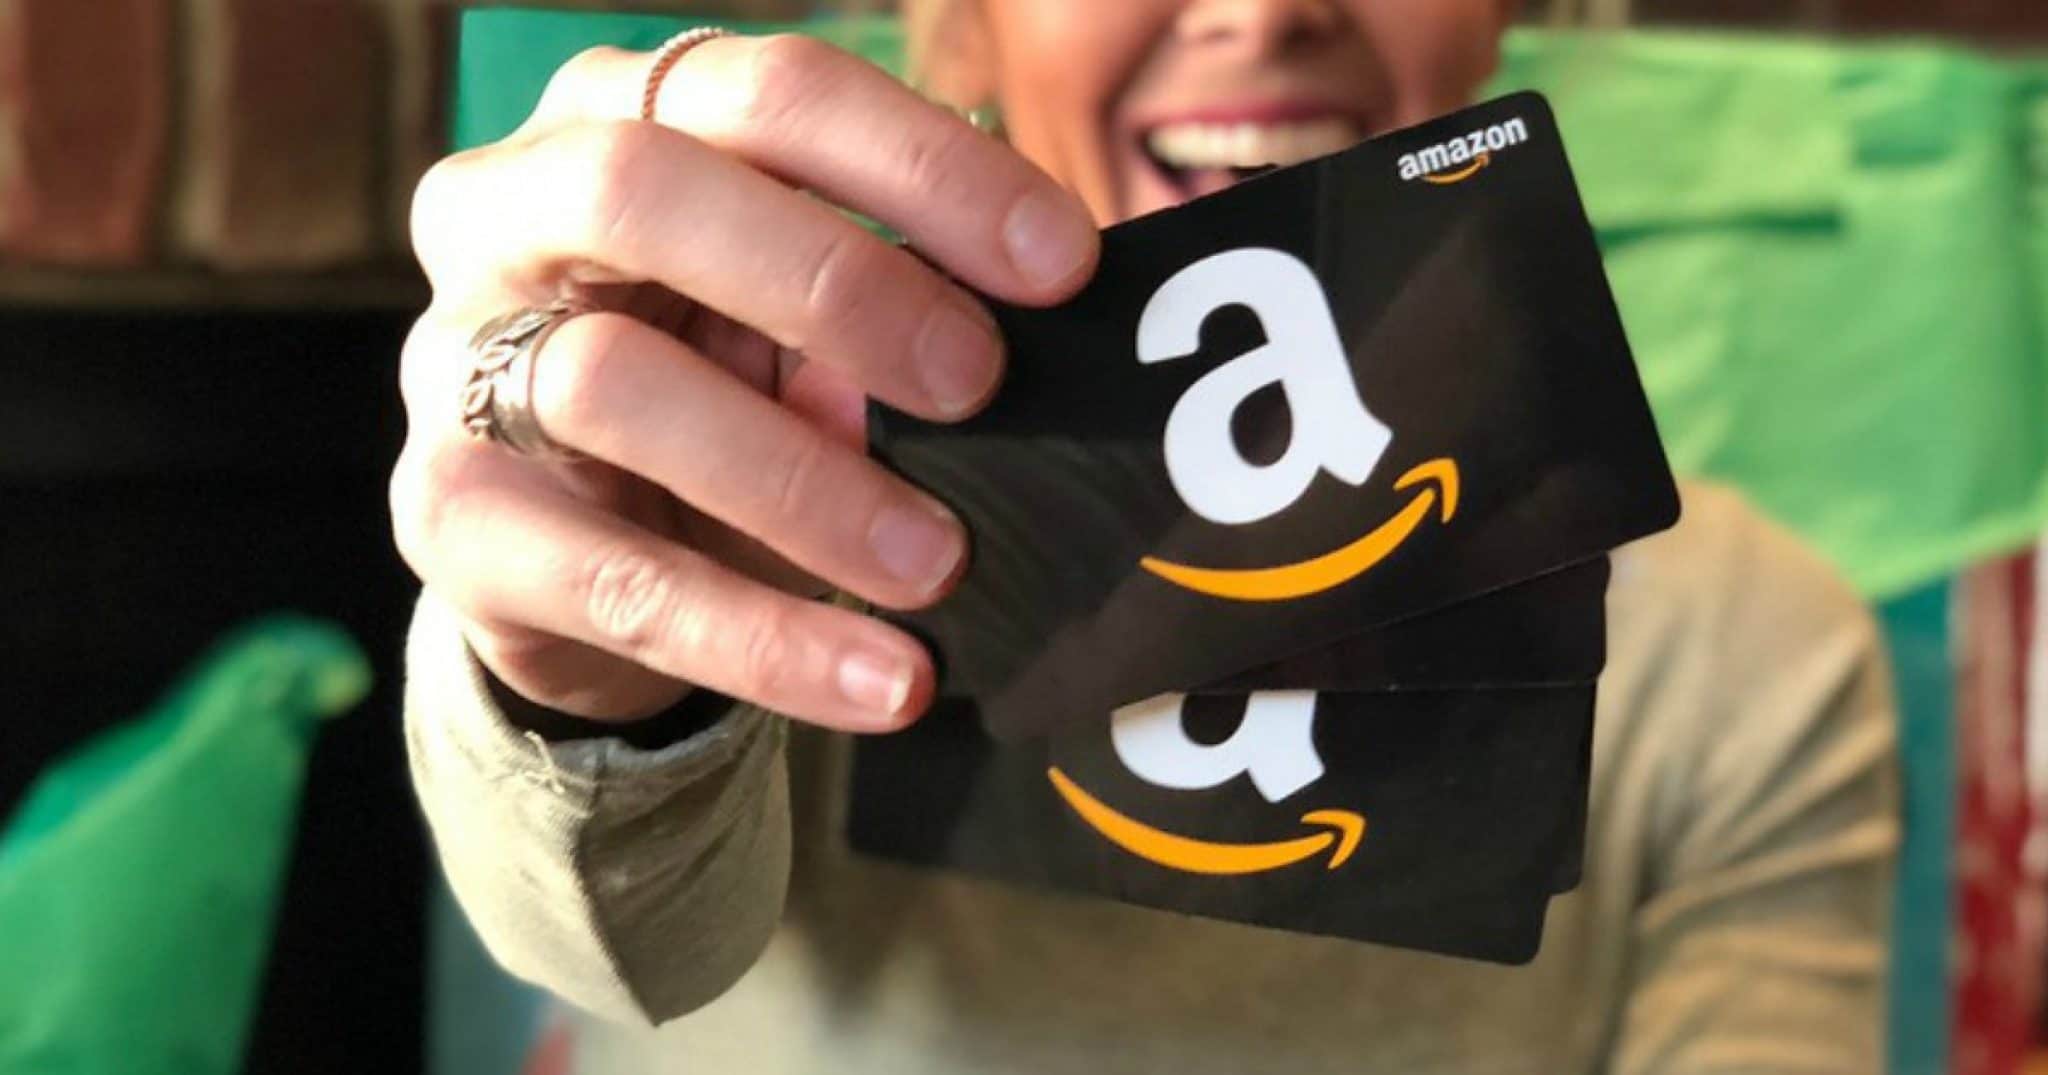 2 x 500 Amazon Gift Cards to win • Canadian Savers